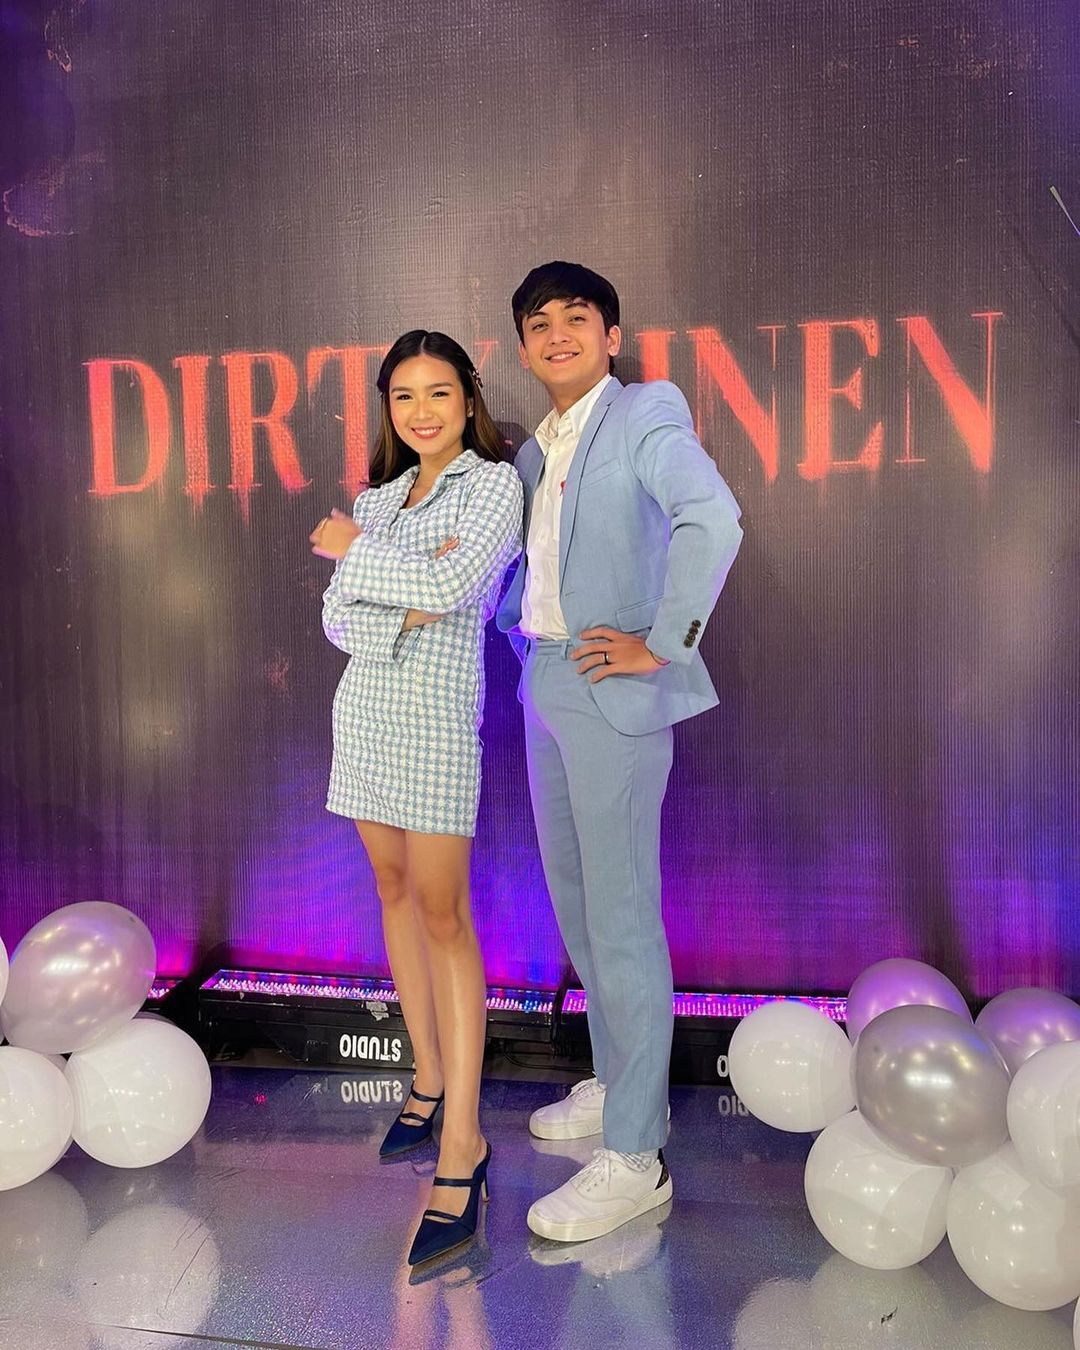 Francine Diaz Seth Fedelin Franseth pairing anniversary love team 5th year fans kadenang ginto dirty linen fractured